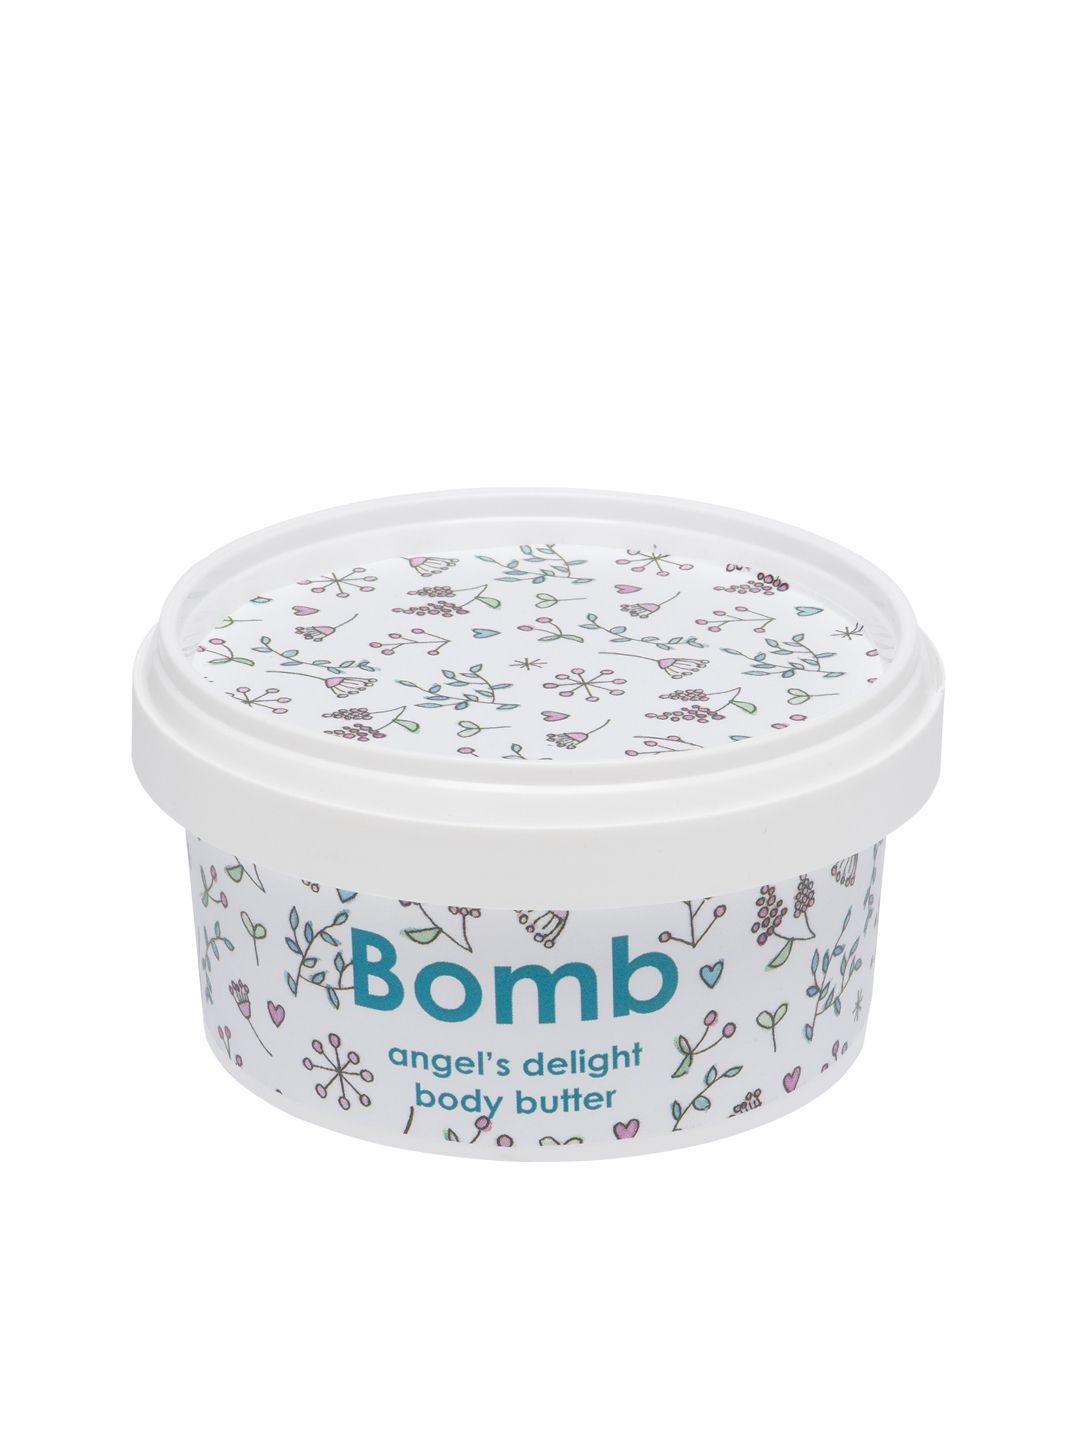 bomb cosmetics angel's delight body butter with shea butter - 200 ml